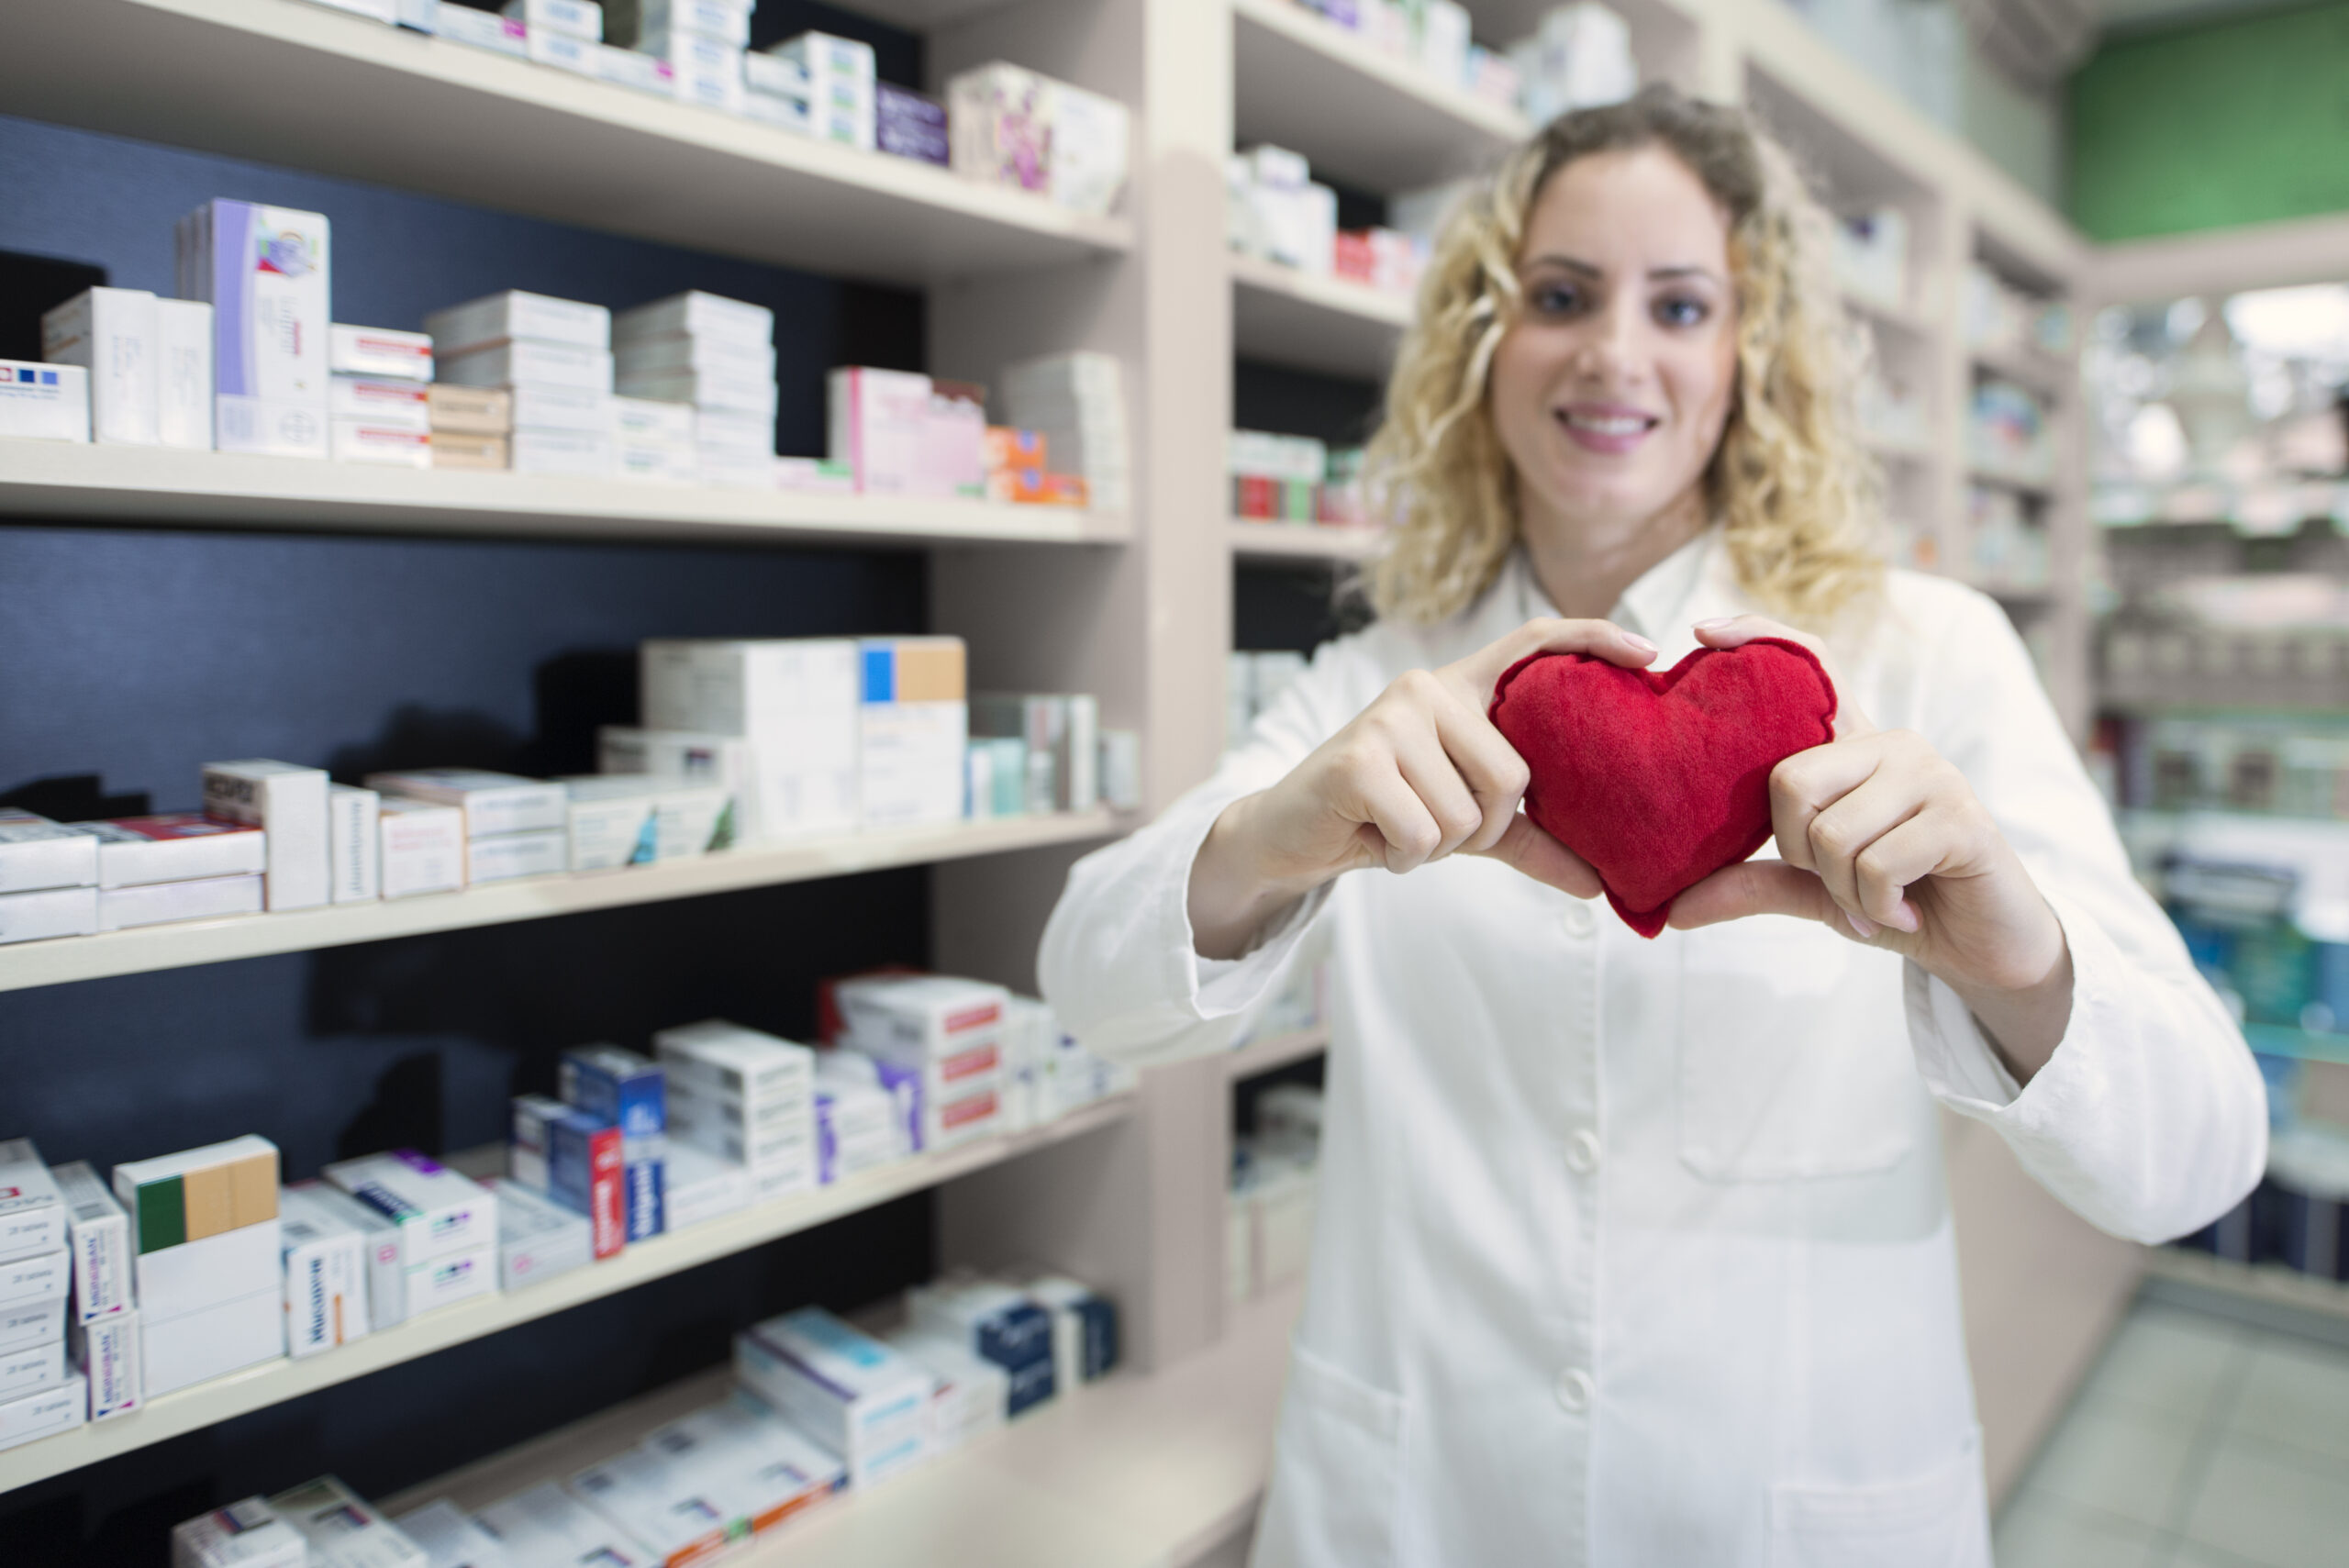 Female pharmacist holding heart and promoting cardiovascular medications and successful treatment. Wellness products